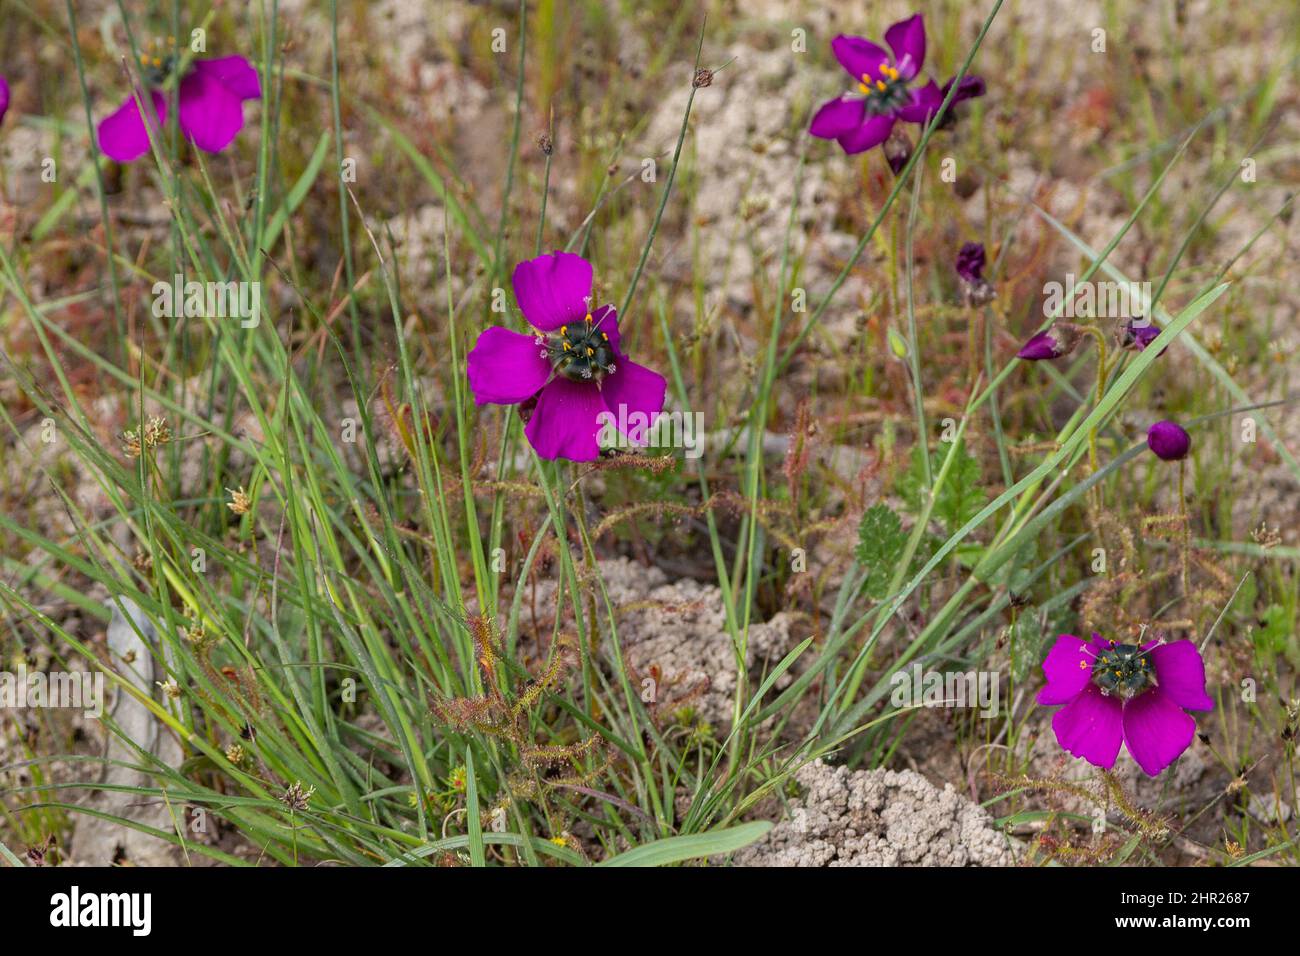 Some purple flowers of Drosera cistiflora, a carnivorous plant from the Sundew family Stock Photo